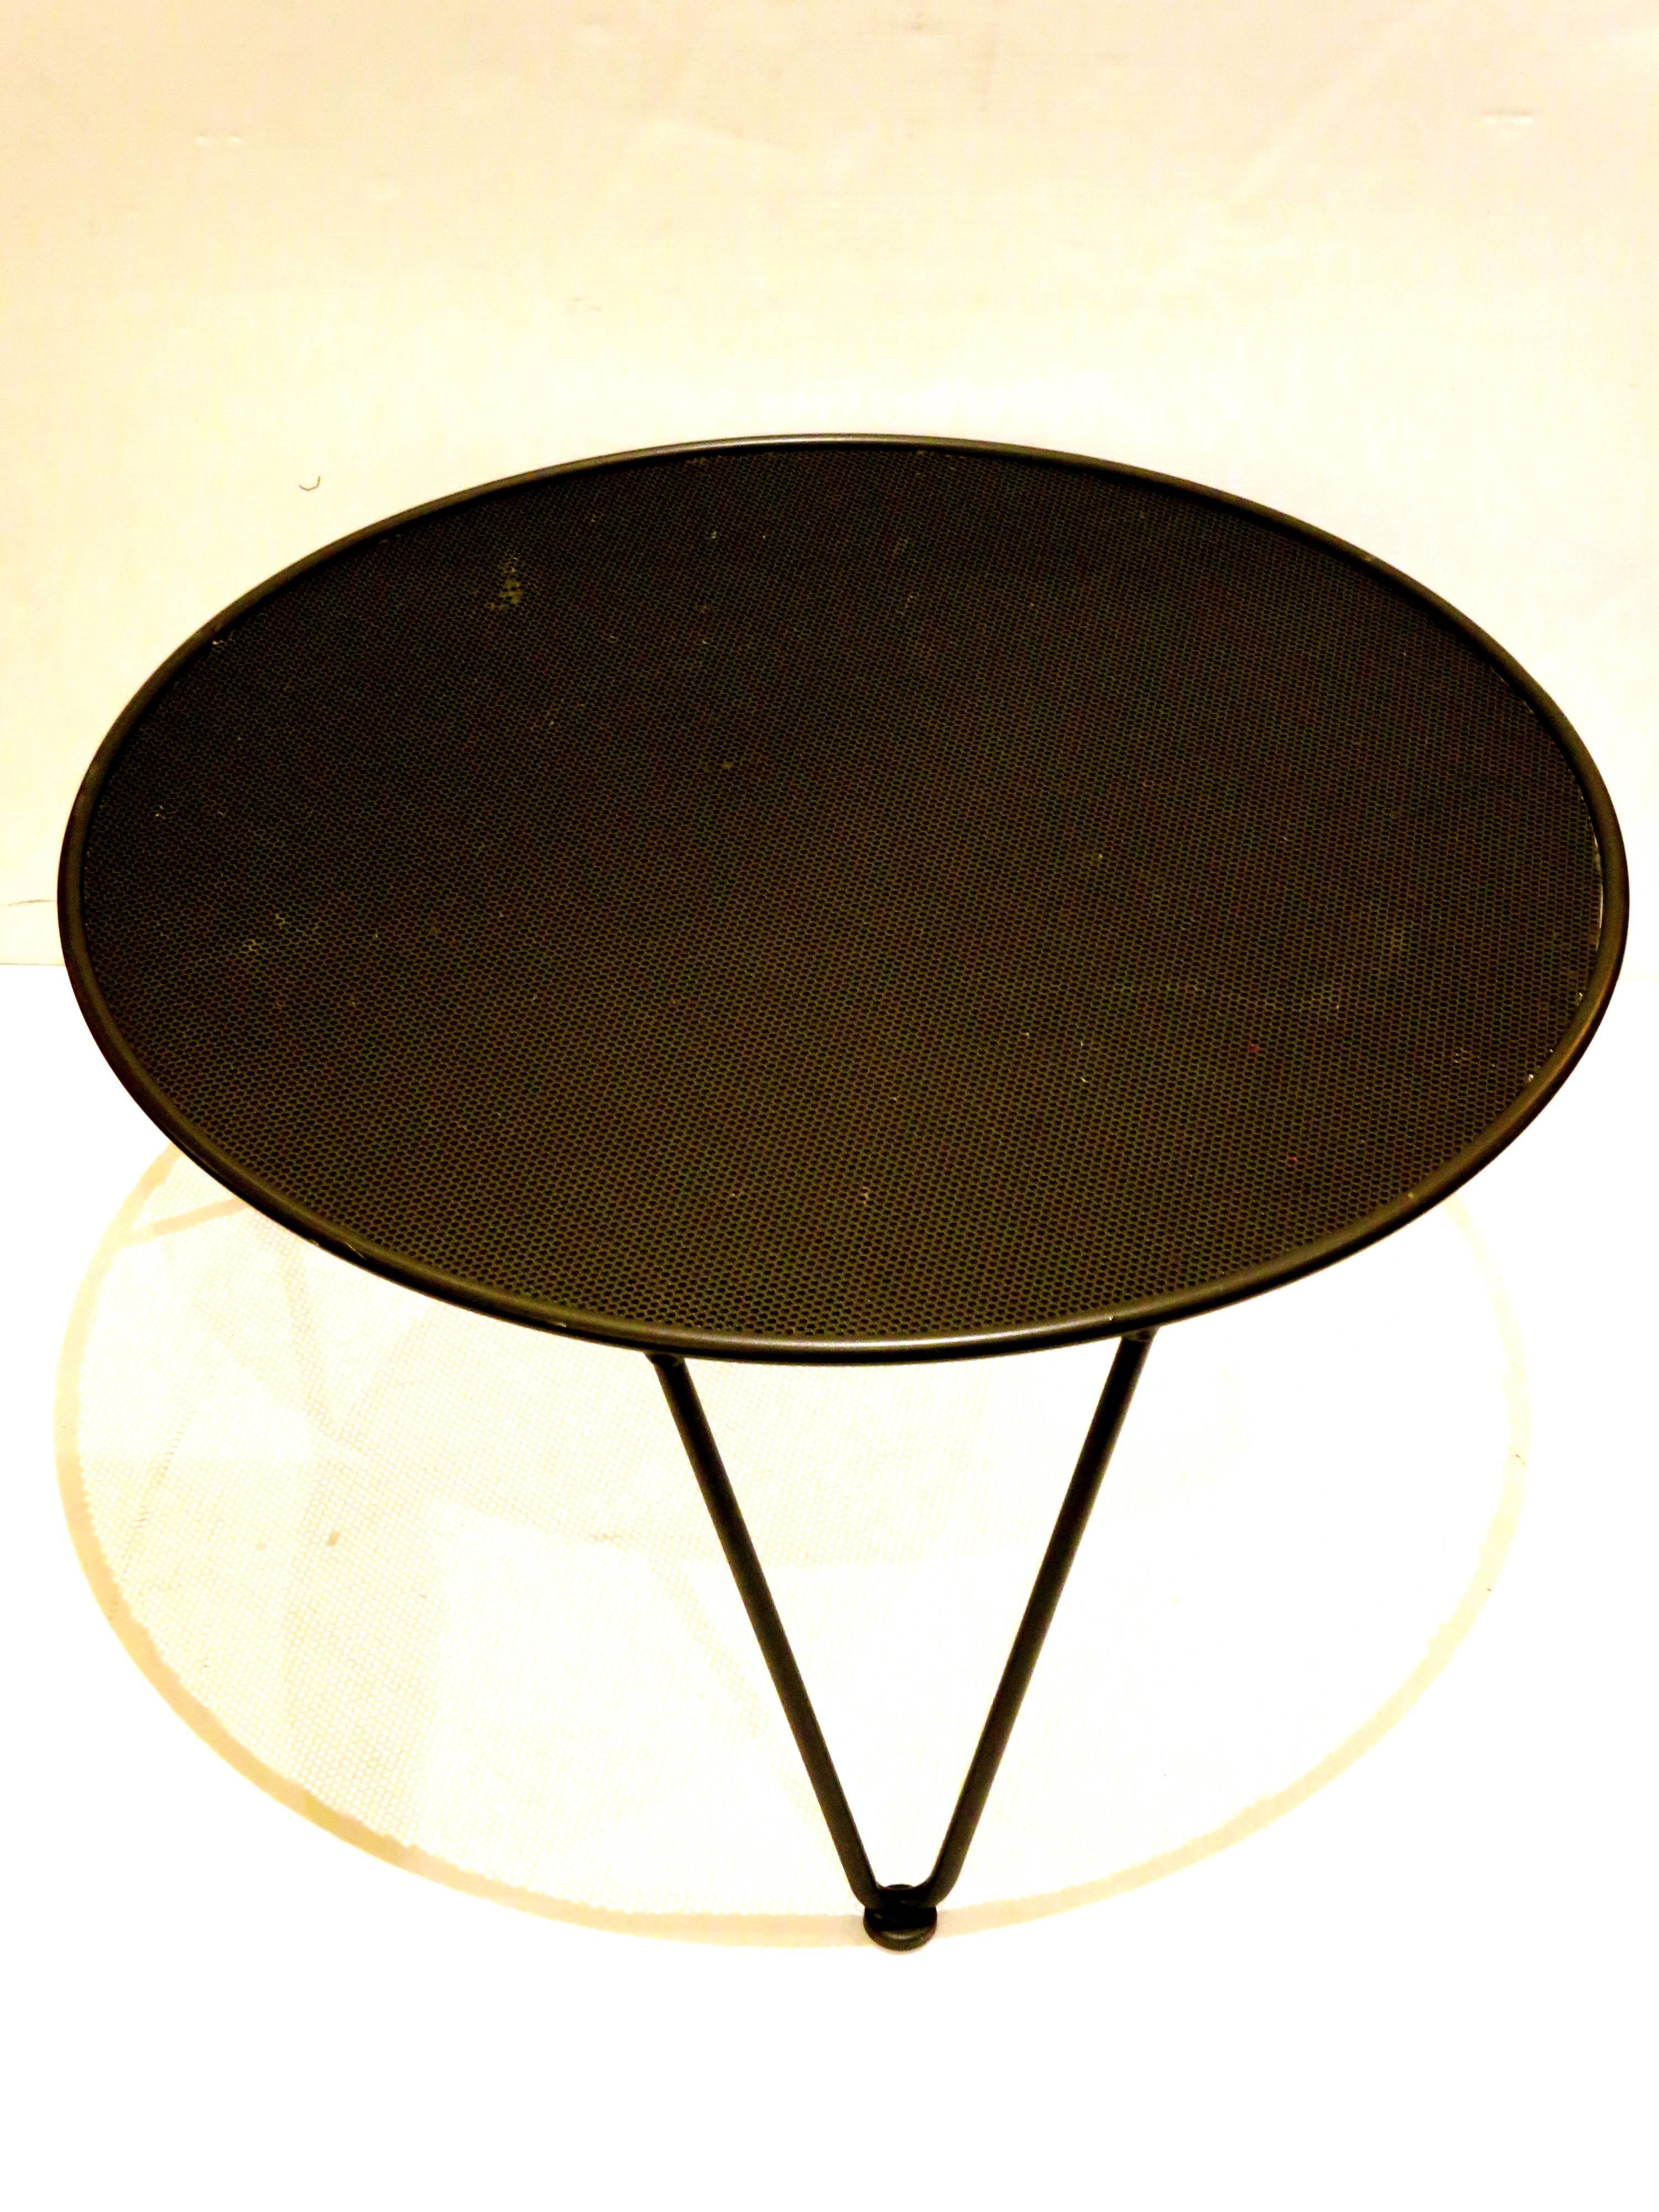 20th Century American Mid-Century Modern Atomic Age Small Patio Round Coffee Table